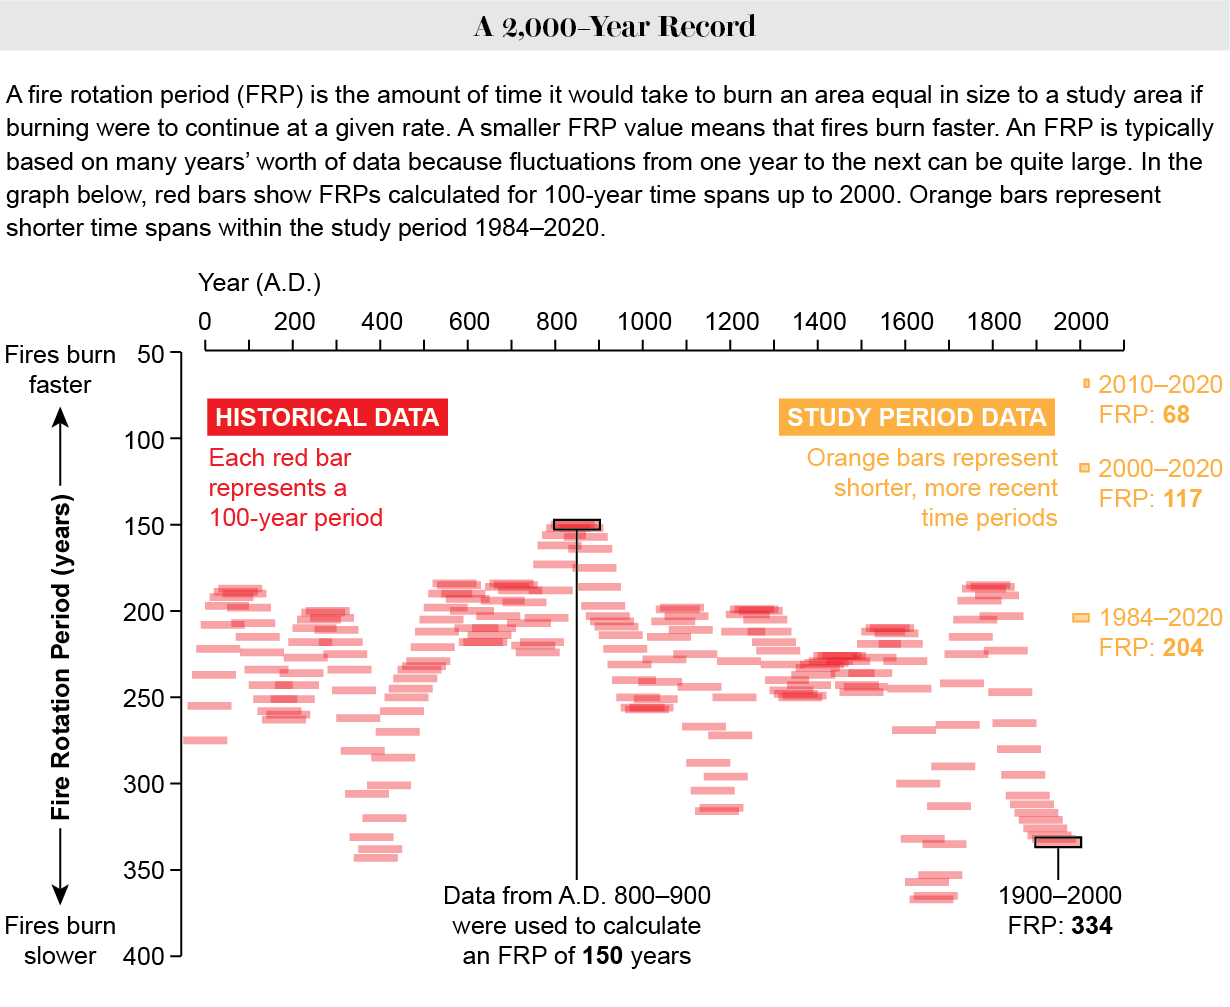 Graph shows fire rotation periods for 100-year intervals between 50 B.C. and 2000, plus FRPs based on data from 1984 to 2020.